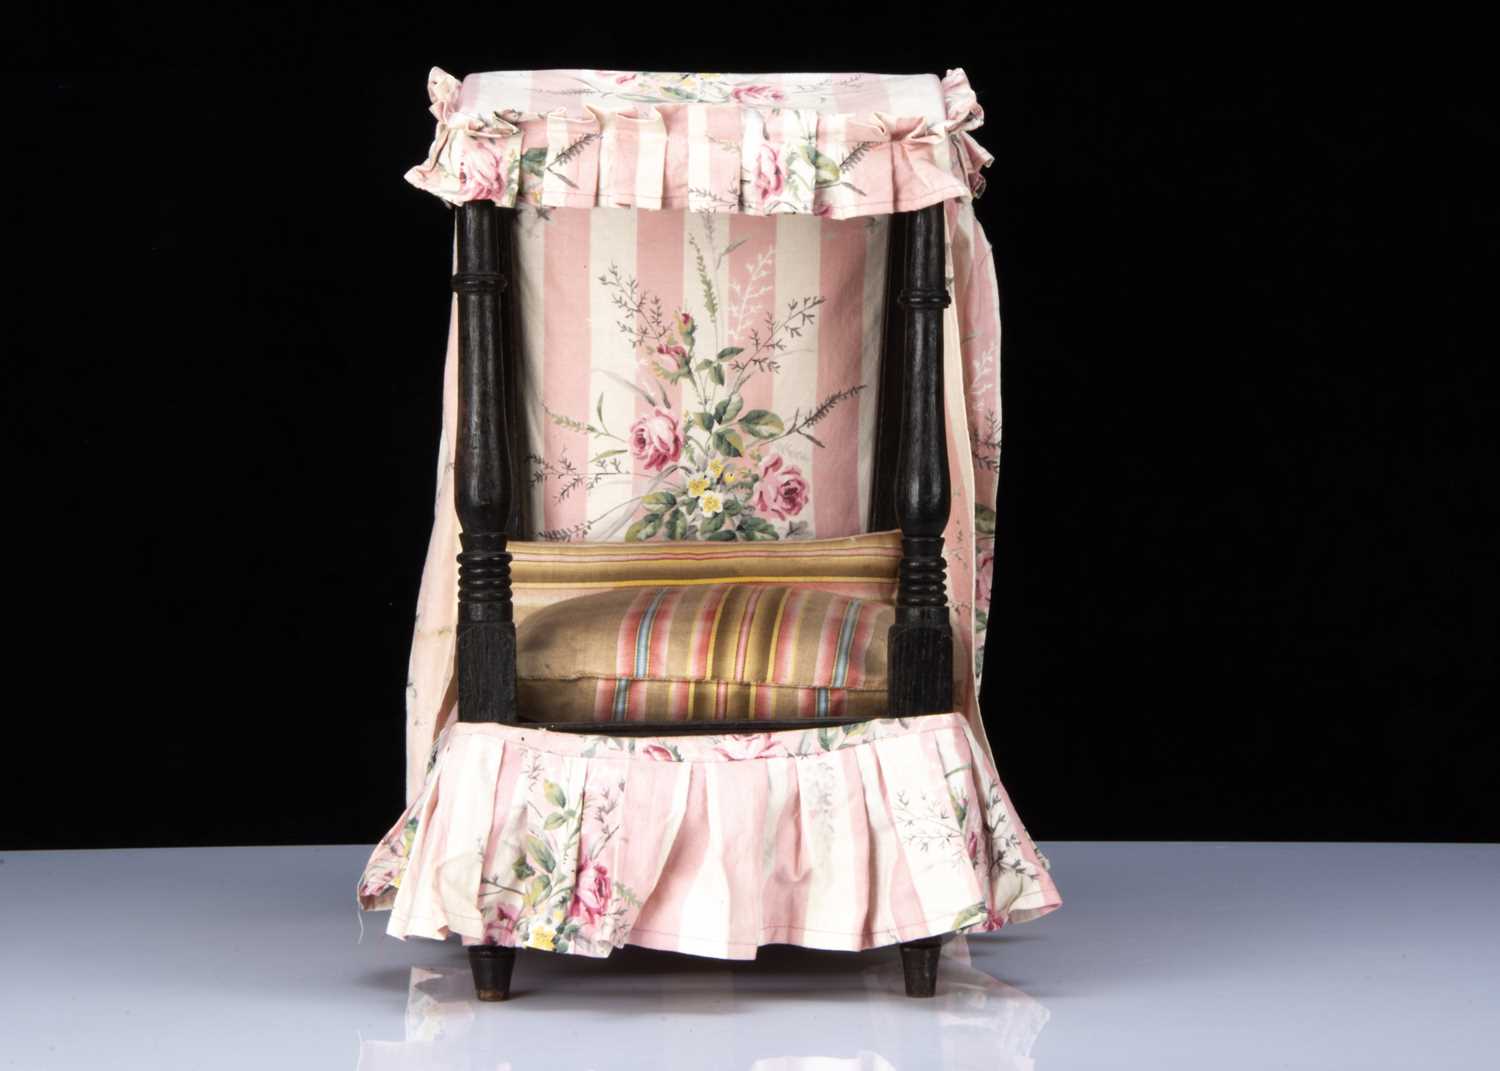 A 19th century English dolls’ tester bed, - Image 2 of 2